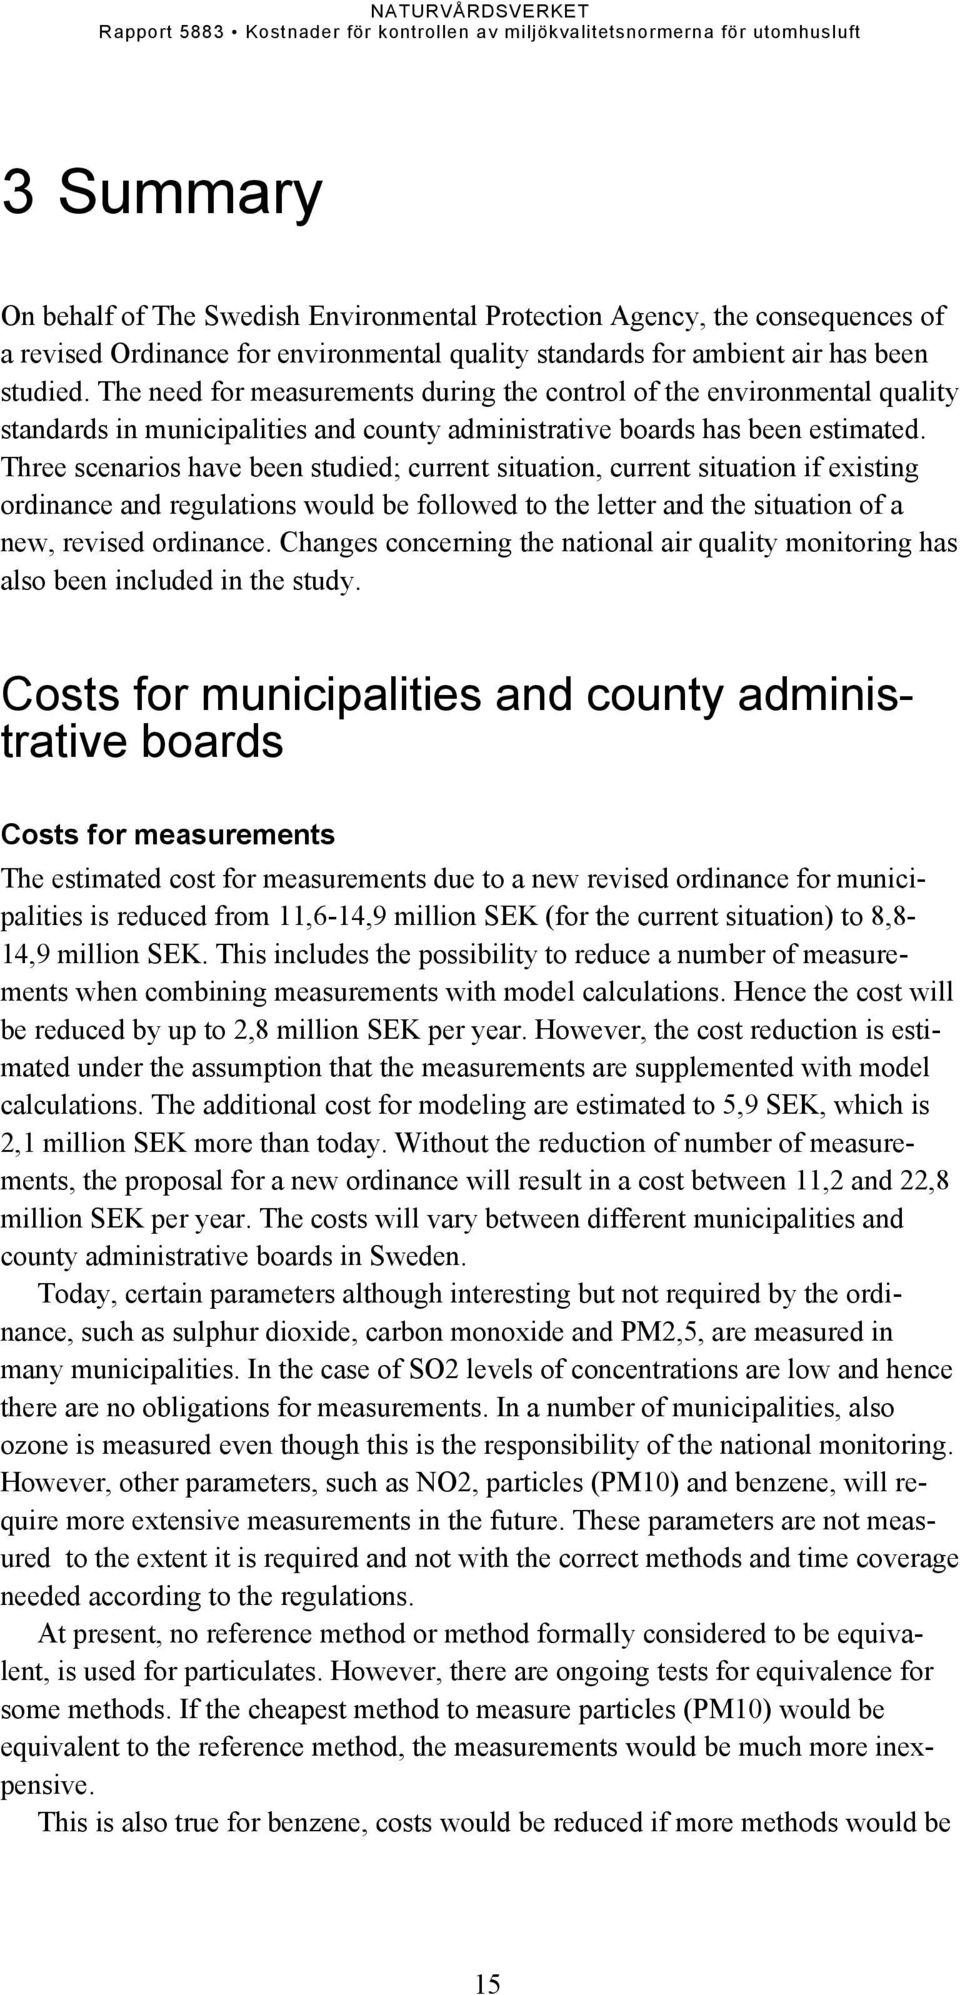 The need for measurements during the control of the environmental quality standards in municipalities and county administrative boards has been estimated.